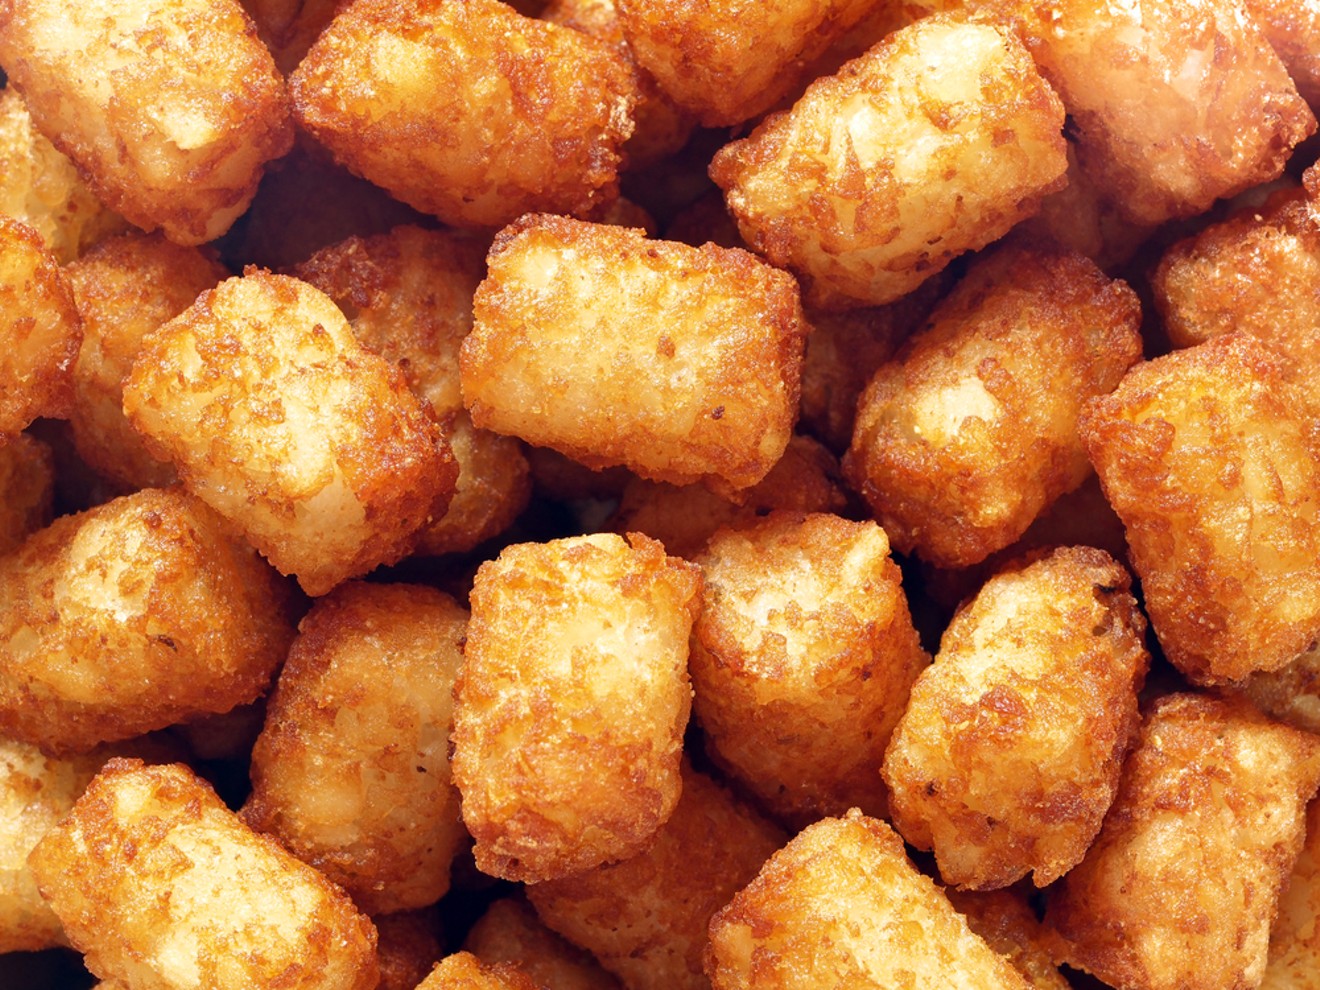 If tater tots are your kind of thing, there's a Fort Worth festival you won't want to miss this weekend.